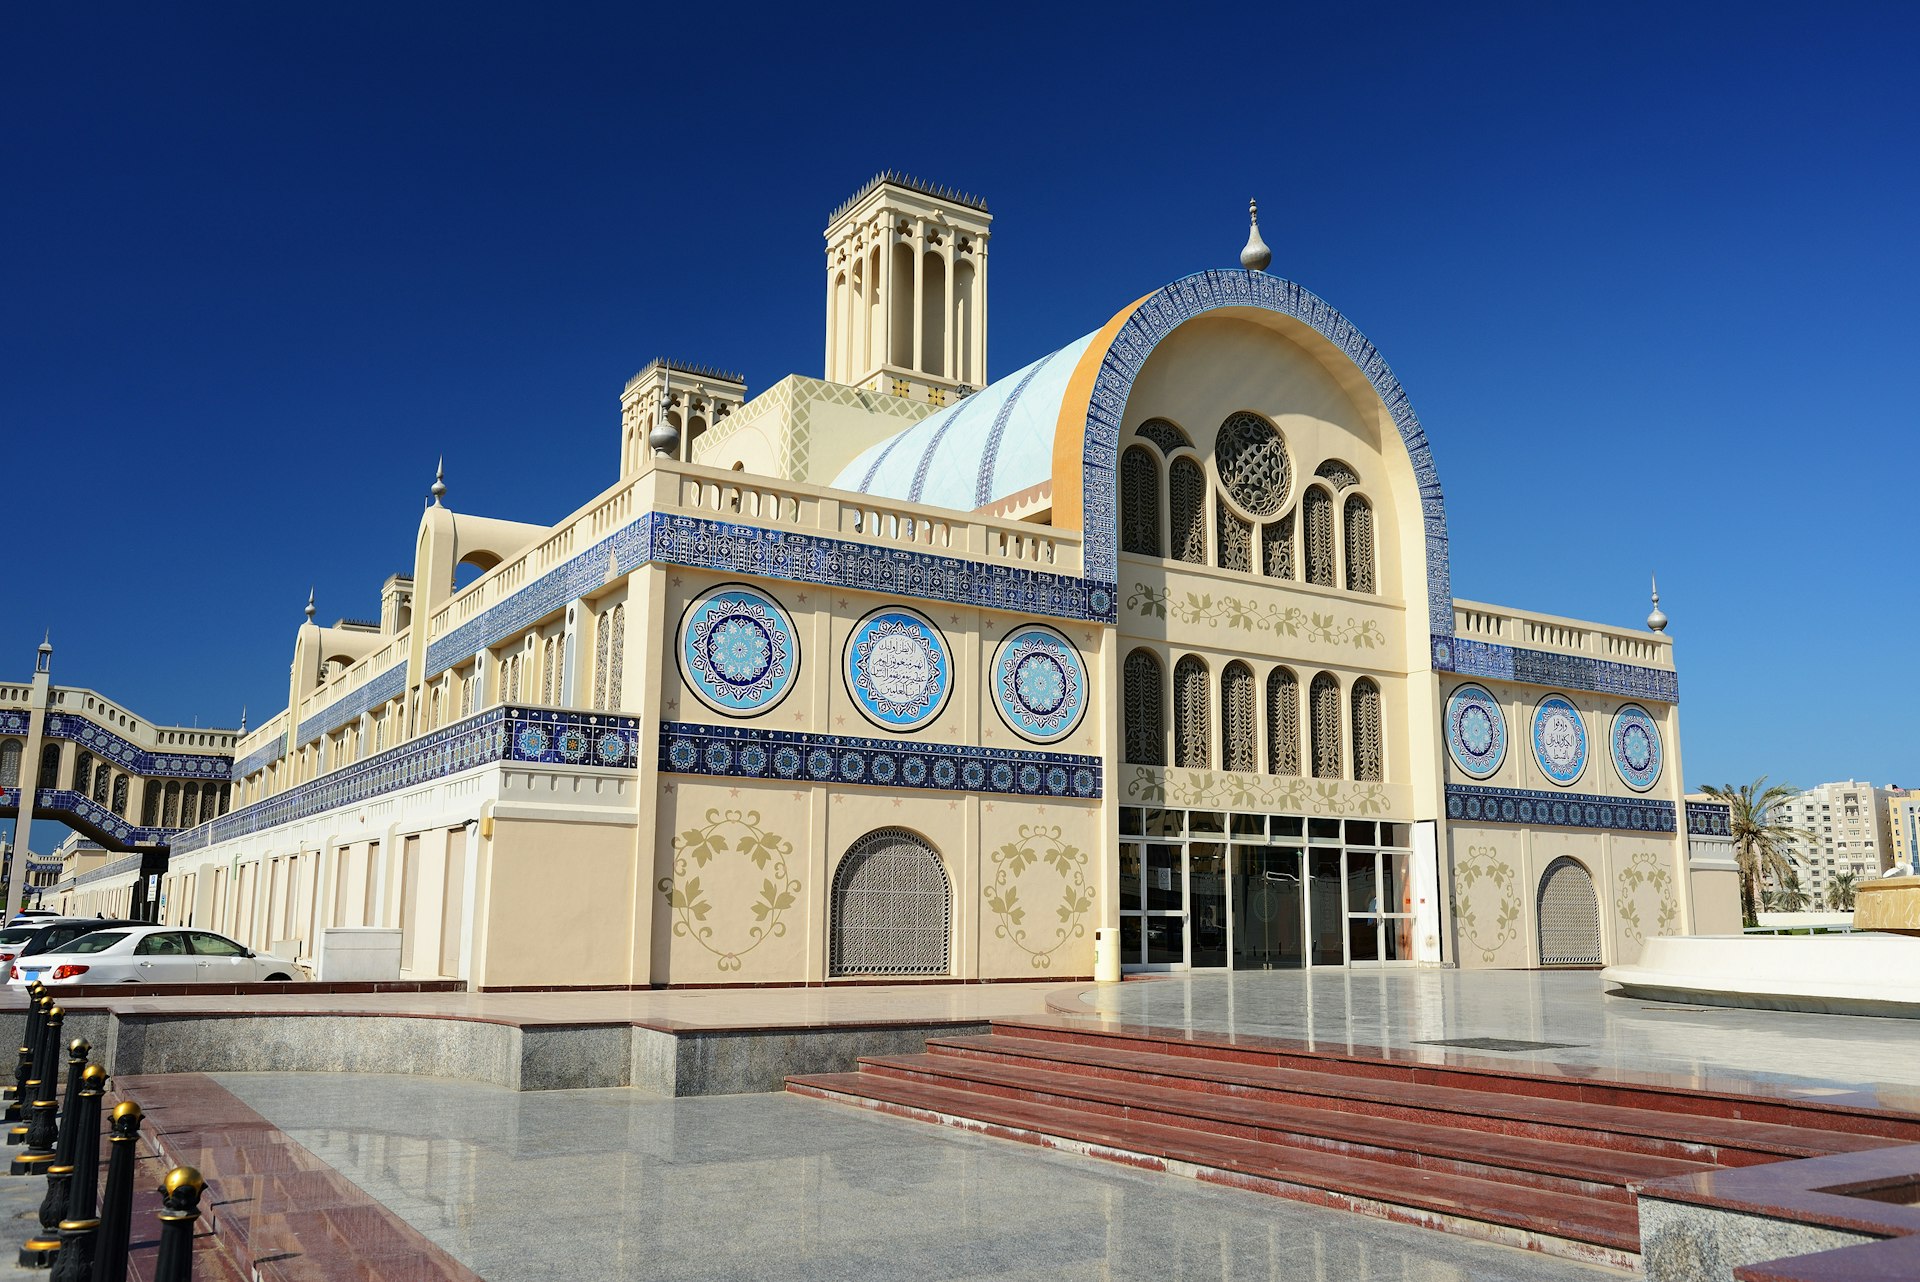 Under a cobalt-blue sky sits a large ornate building with a long cylindrical roof with several square towers; the outside is dominated by a creamy yellow colour, with blue accents.